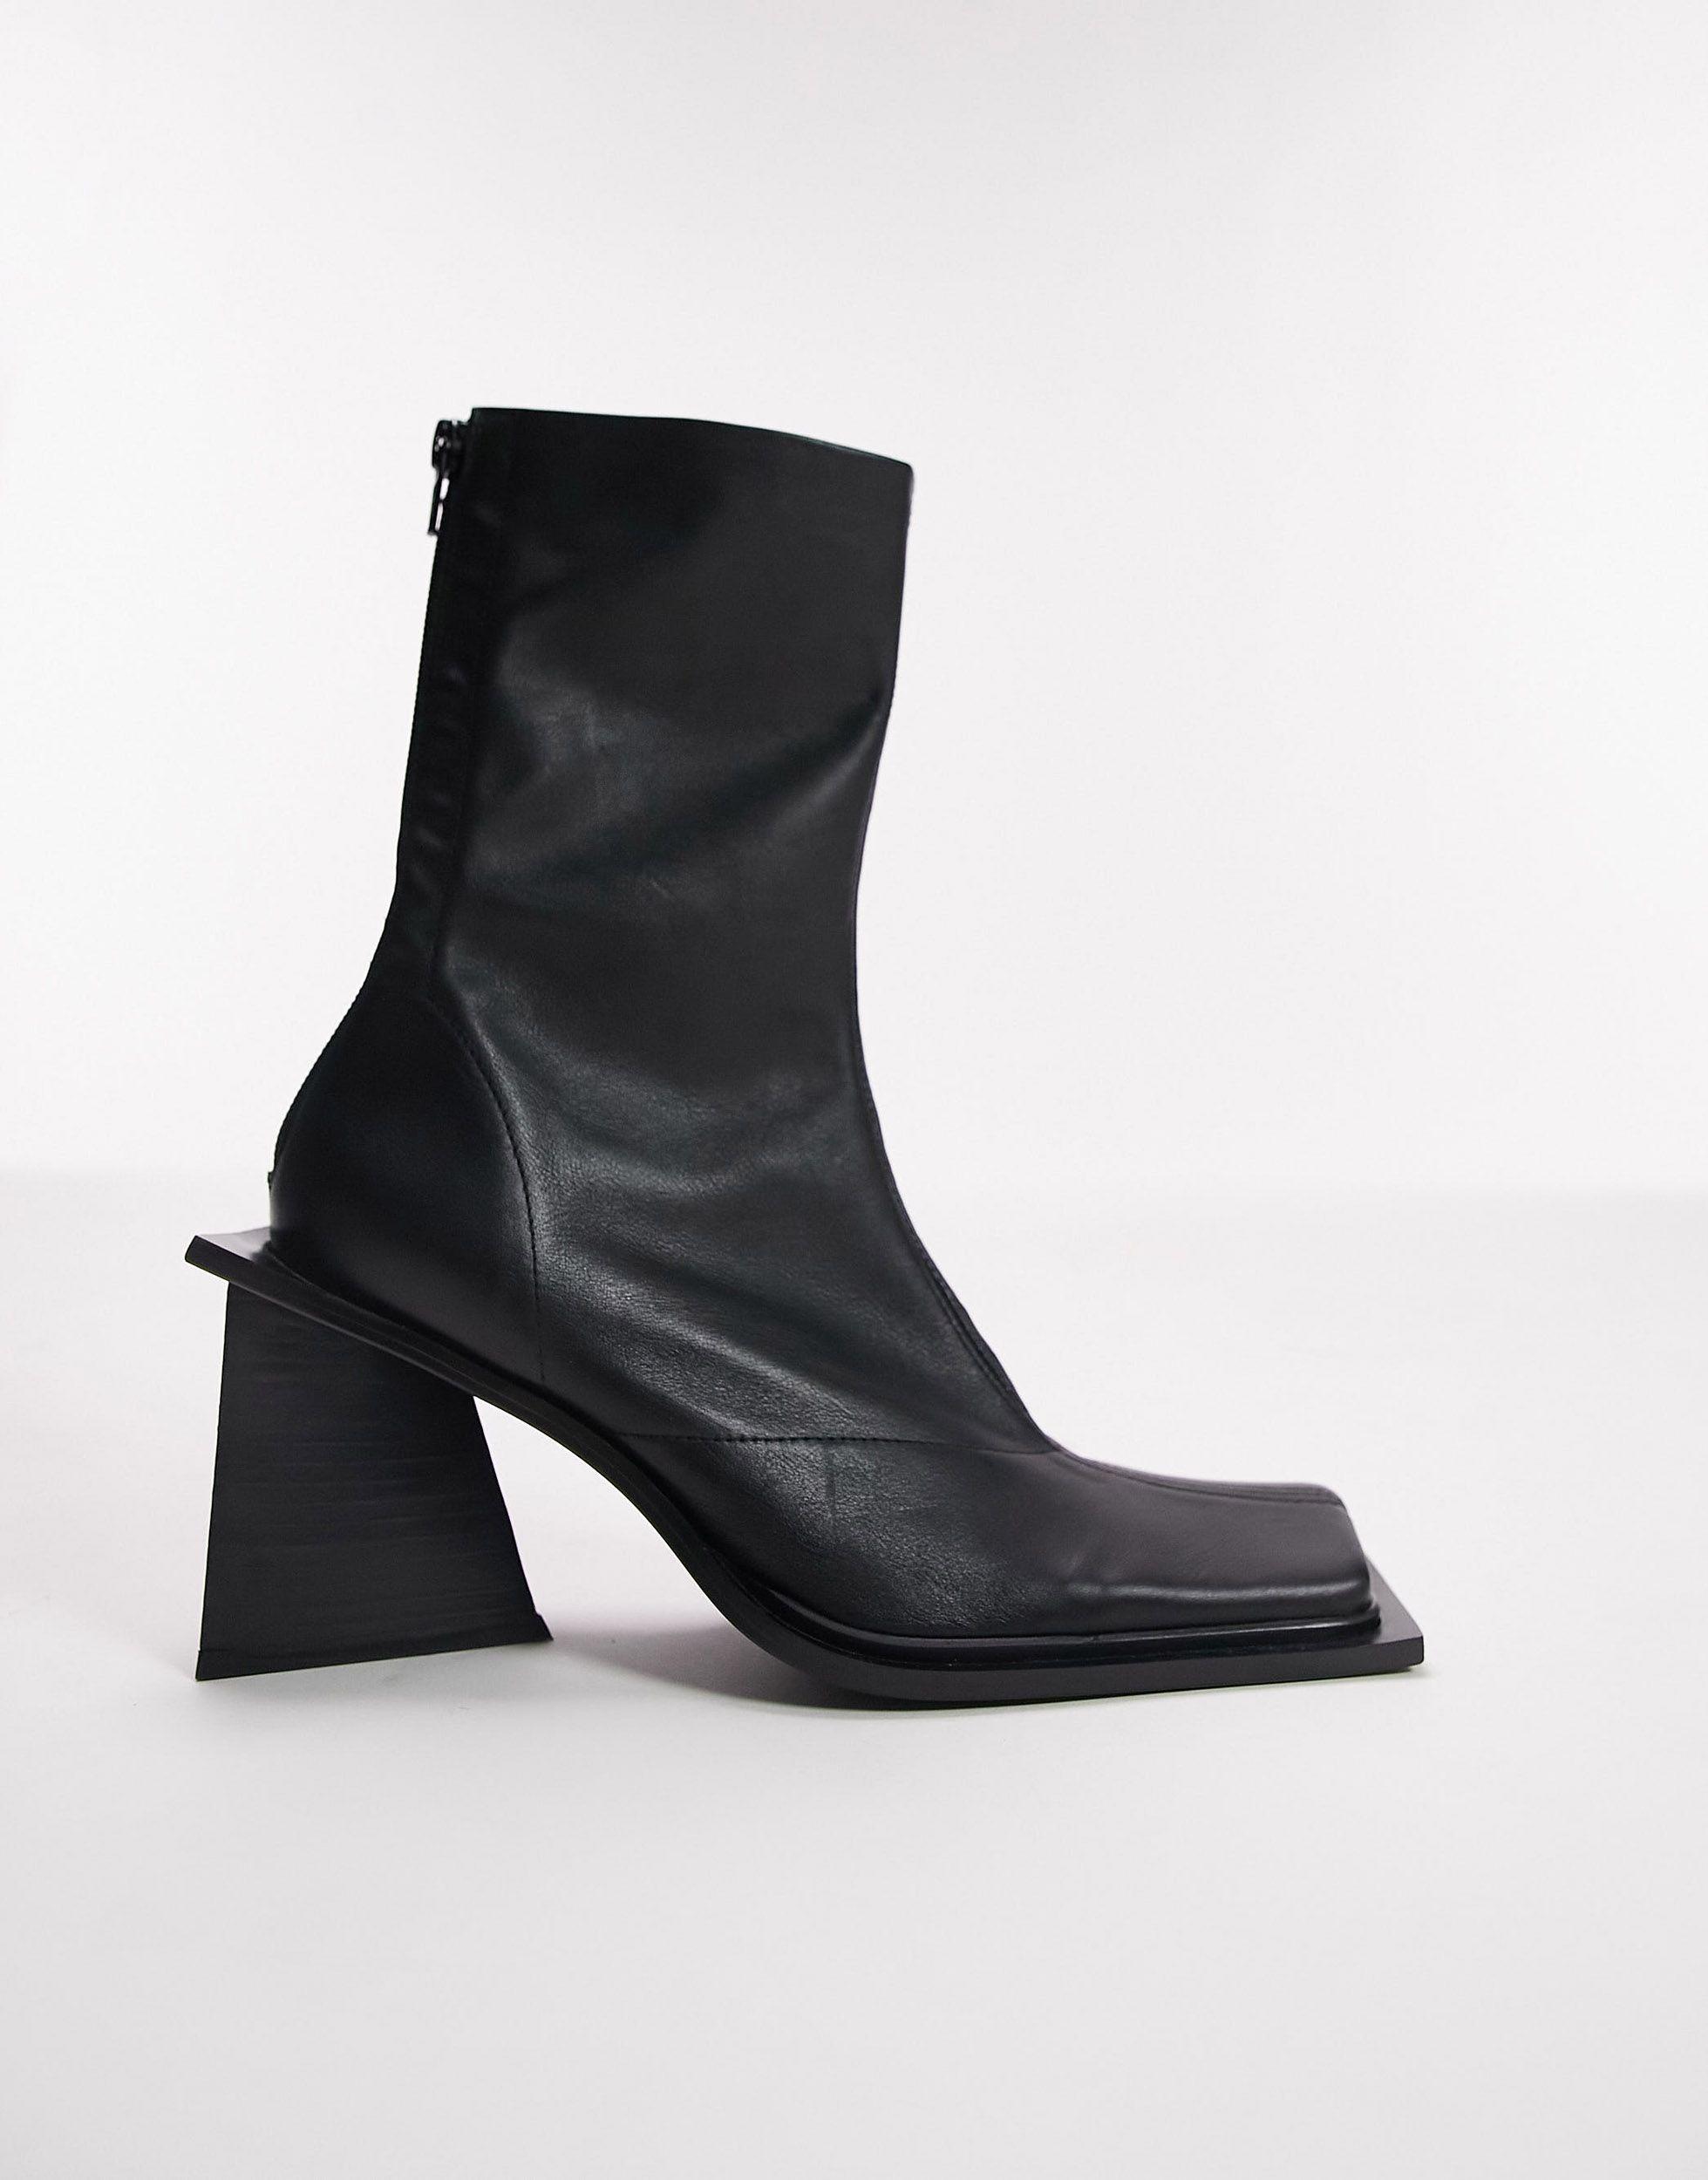 TOPSHOP Halo Premium Leather Square Toe Heeled Boot in Black | Lyst